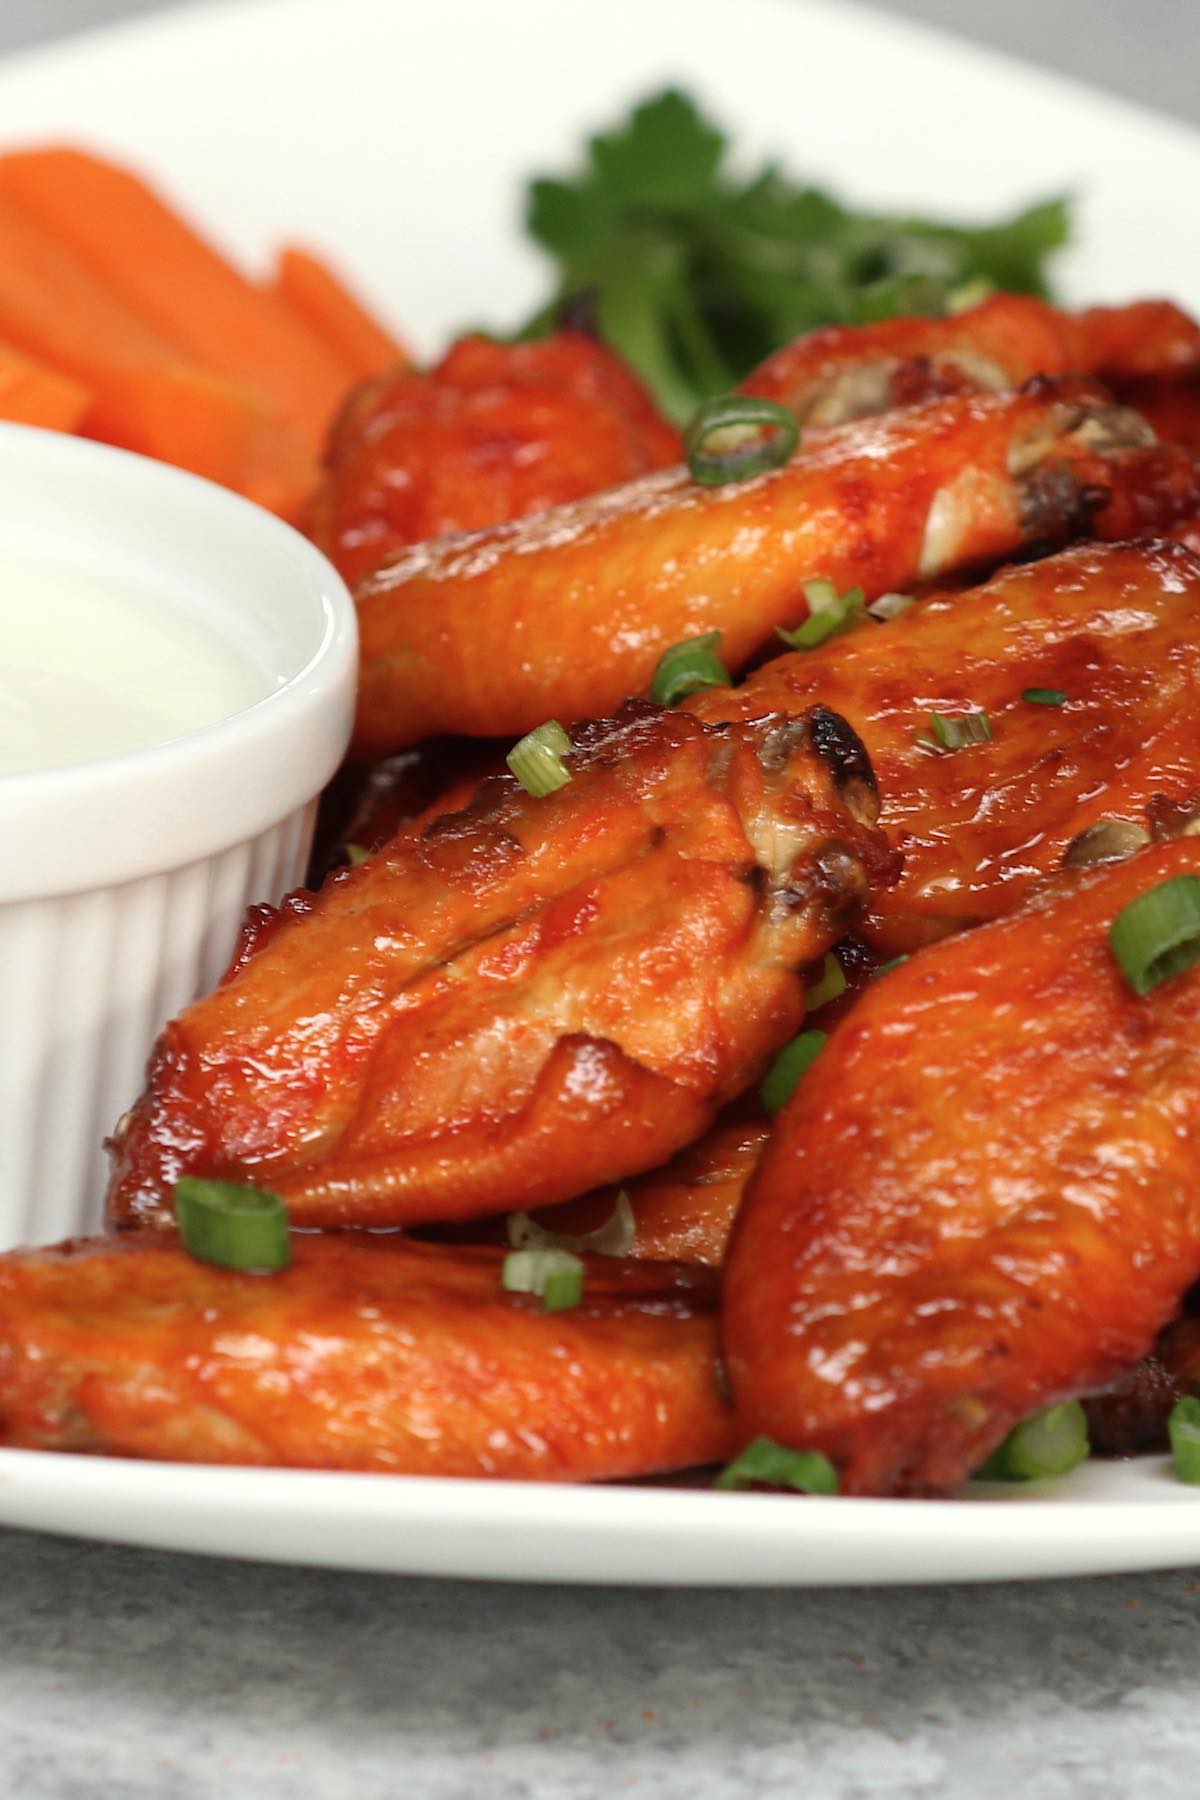 You’ll be amazed at just how perfect Sous Vide Chicken Wings are! It eliminates the mess and oil of deep fried chicken wings while creating the delicious game day snack! Cooking them sous vide means these Buffalo chicken wings come out perfectly tender, juicy, and are loaded with flavor. #SousVideChickenWings